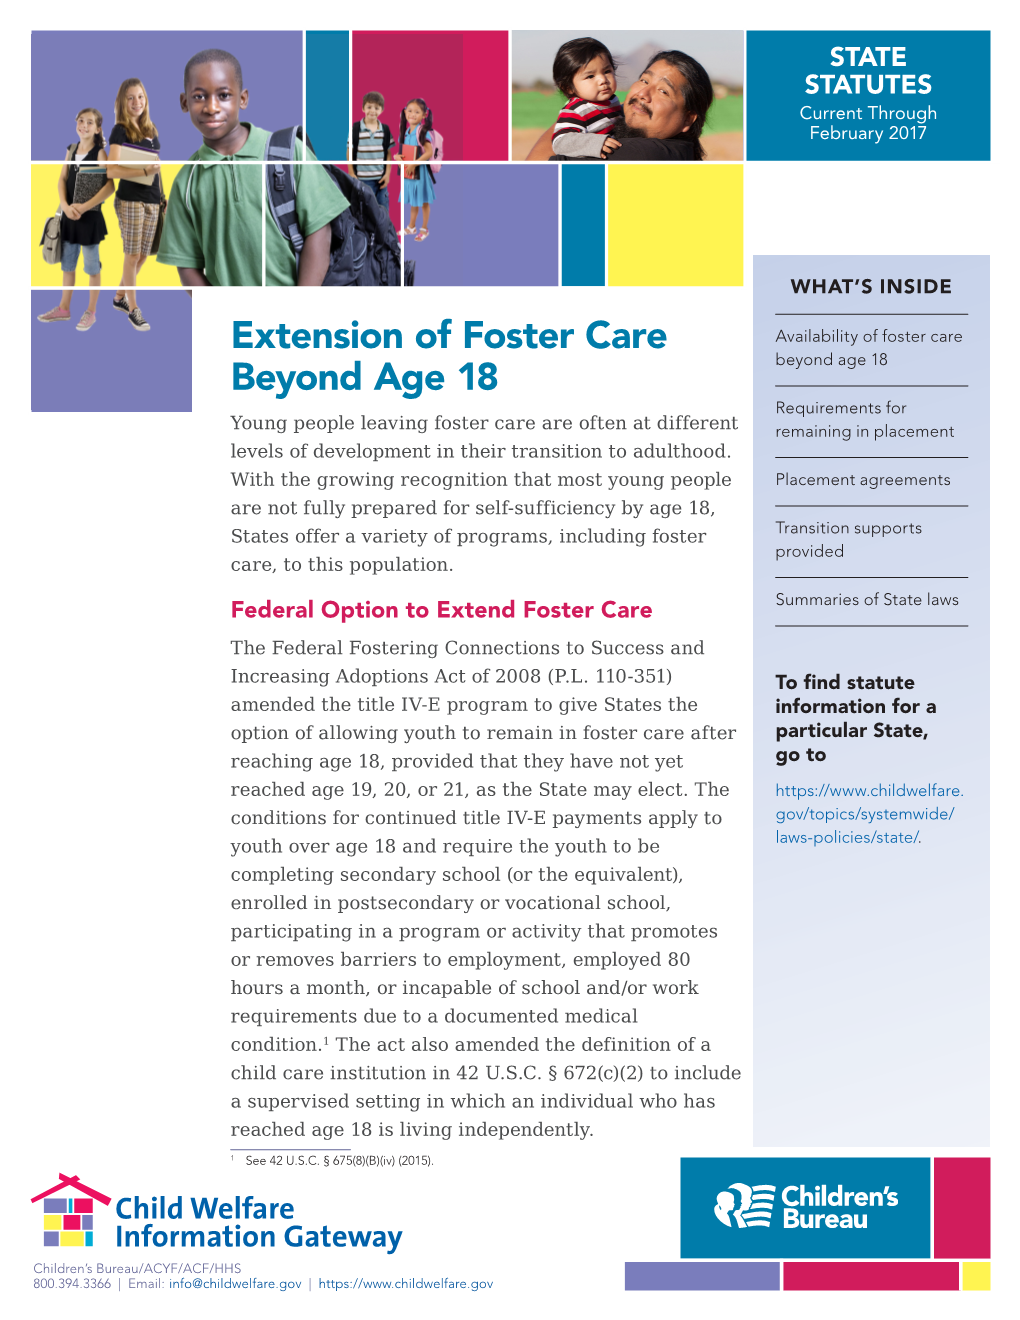 Extension of Foster Care Beyond Age 18